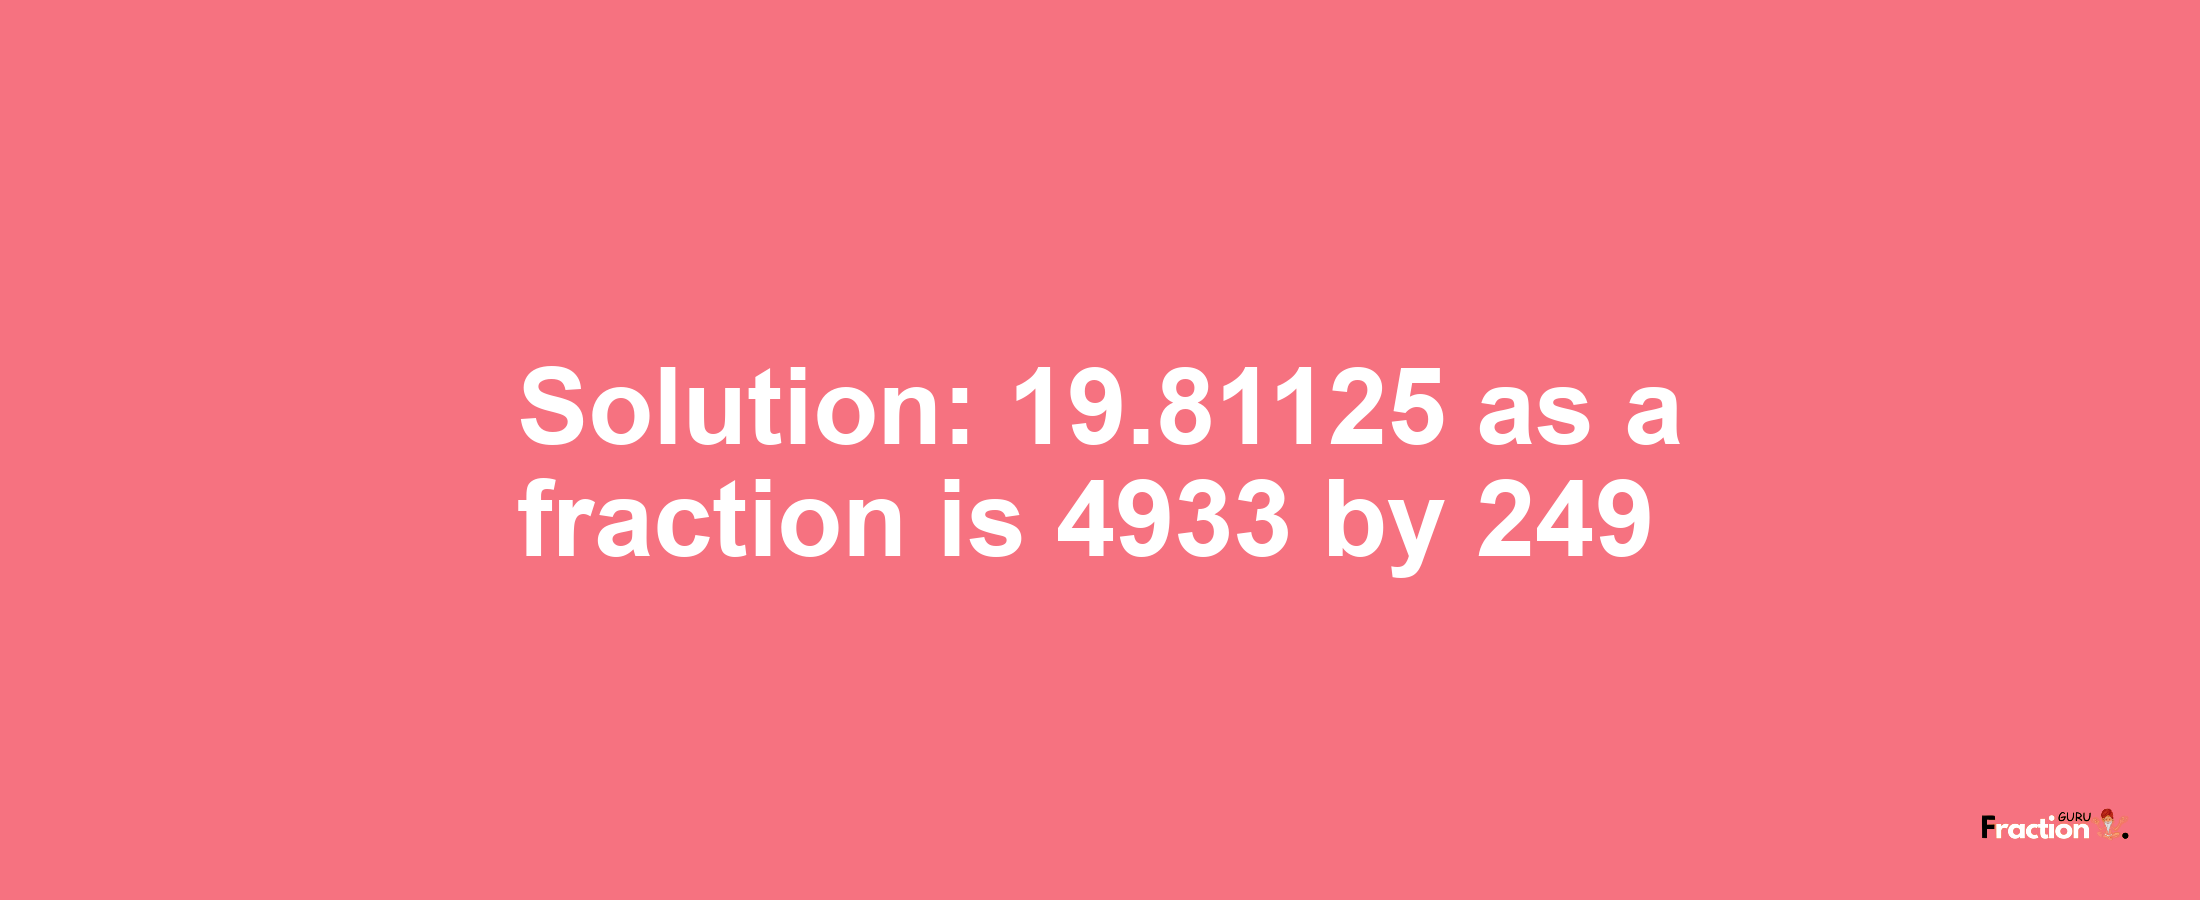 Solution:19.81125 as a fraction is 4933/249